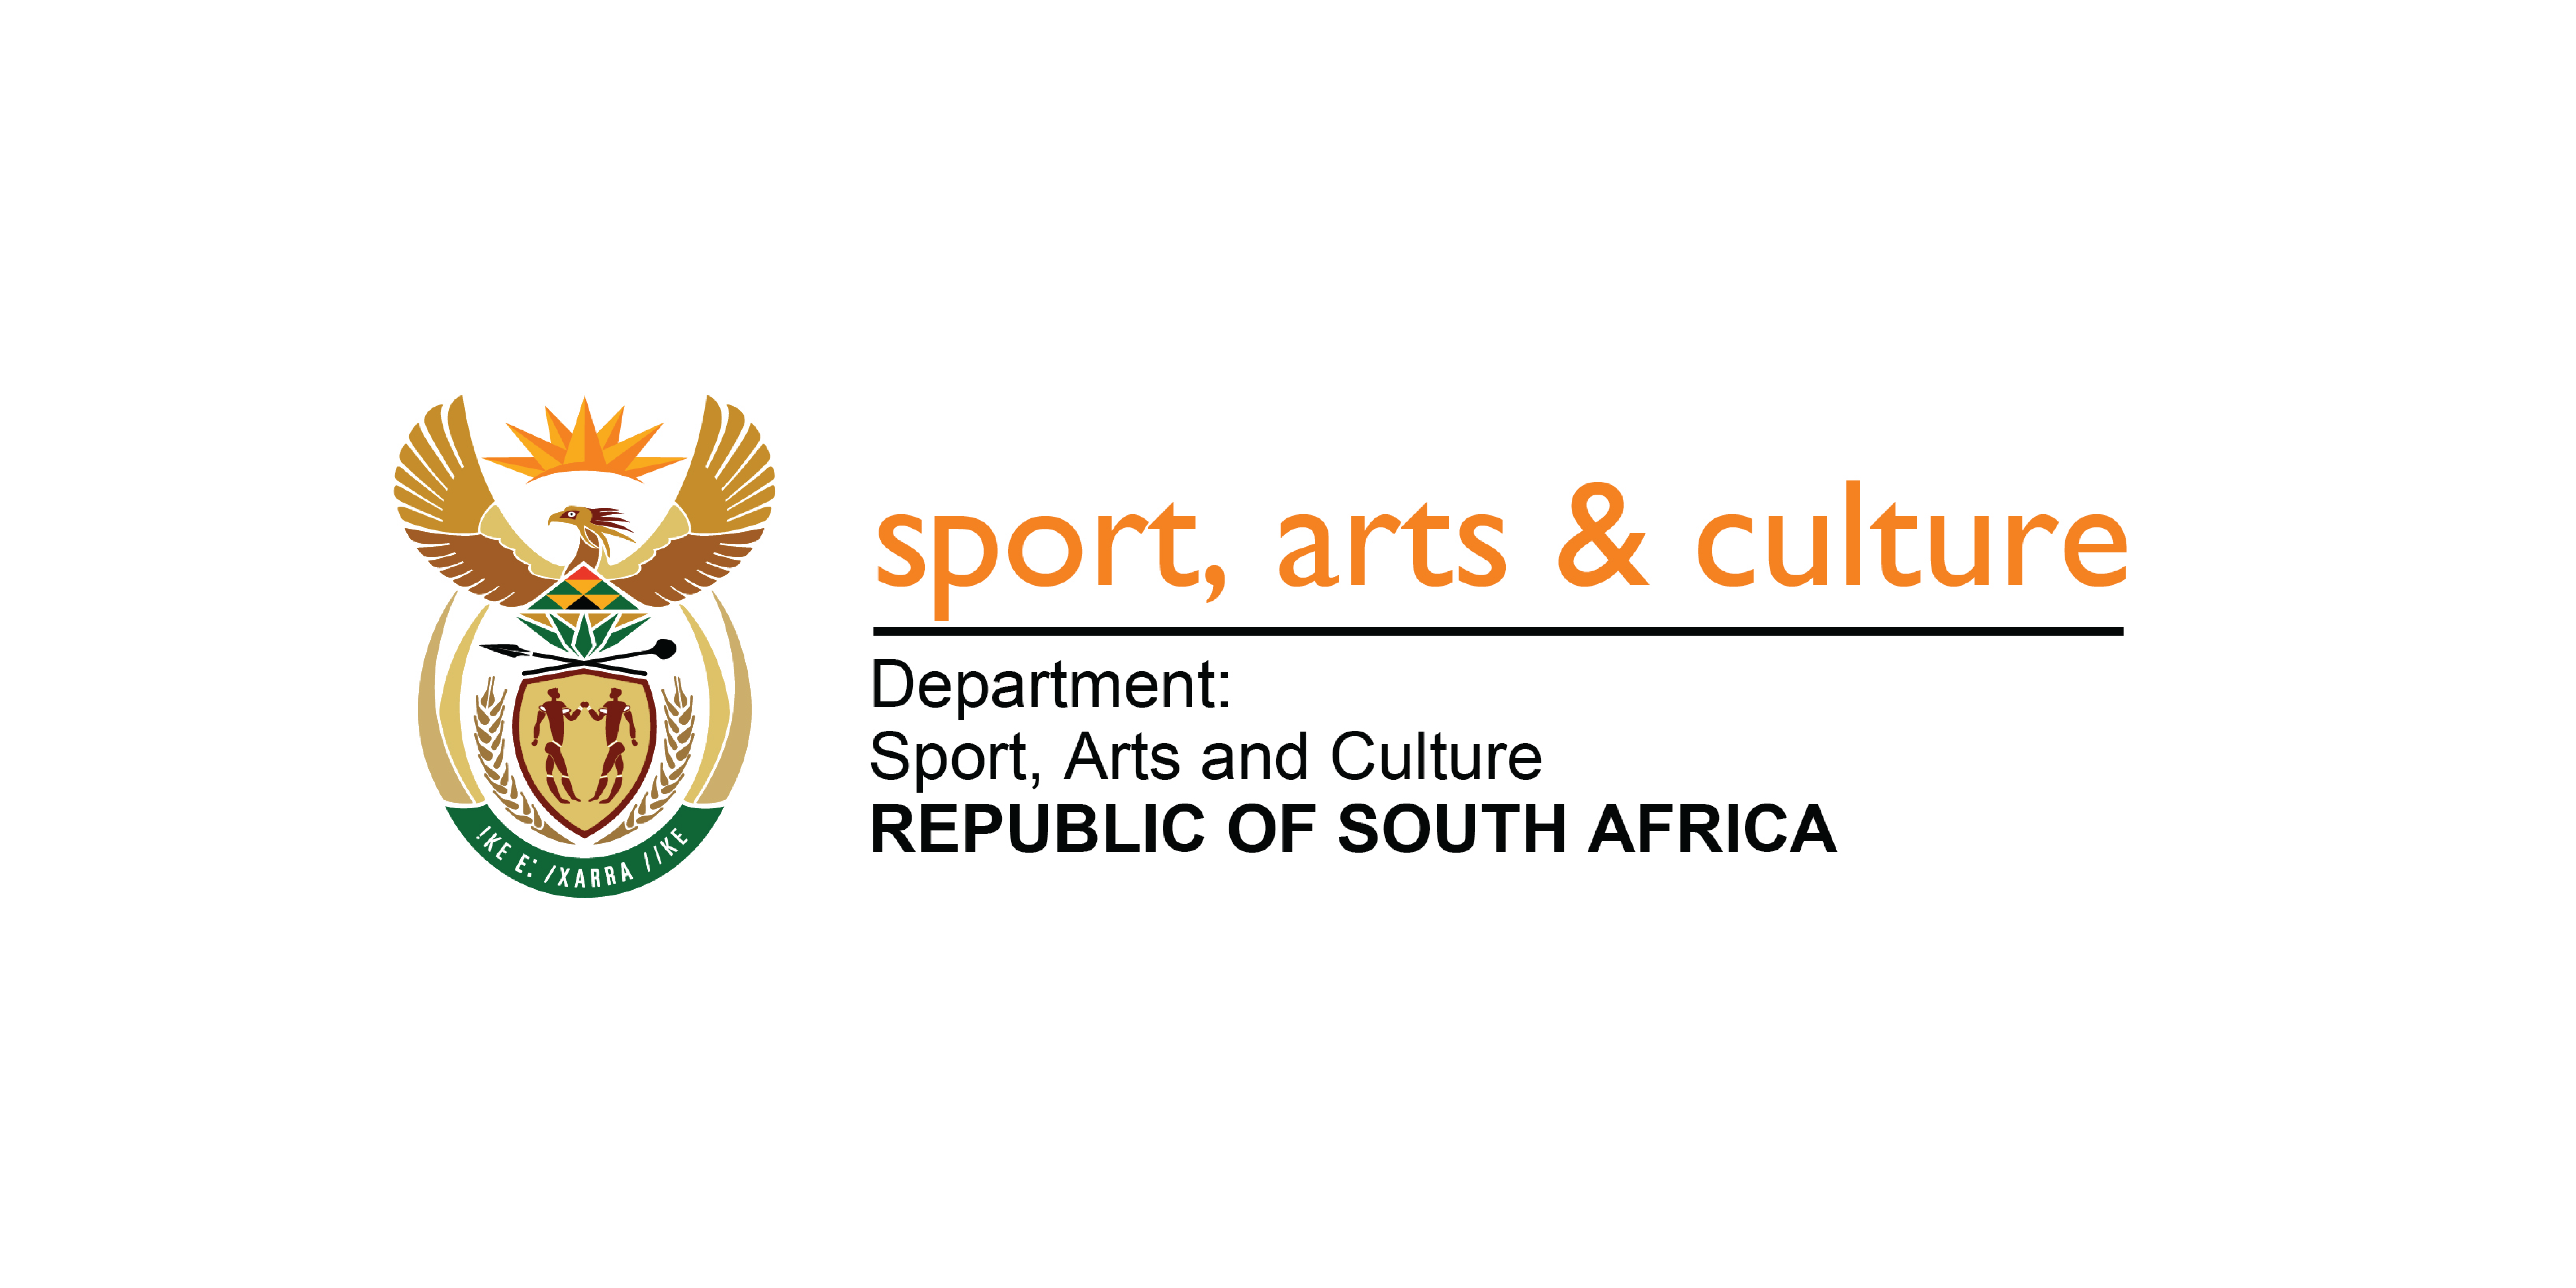 DEP SPORTS ART AND CULTURE, Graphic Design Courses